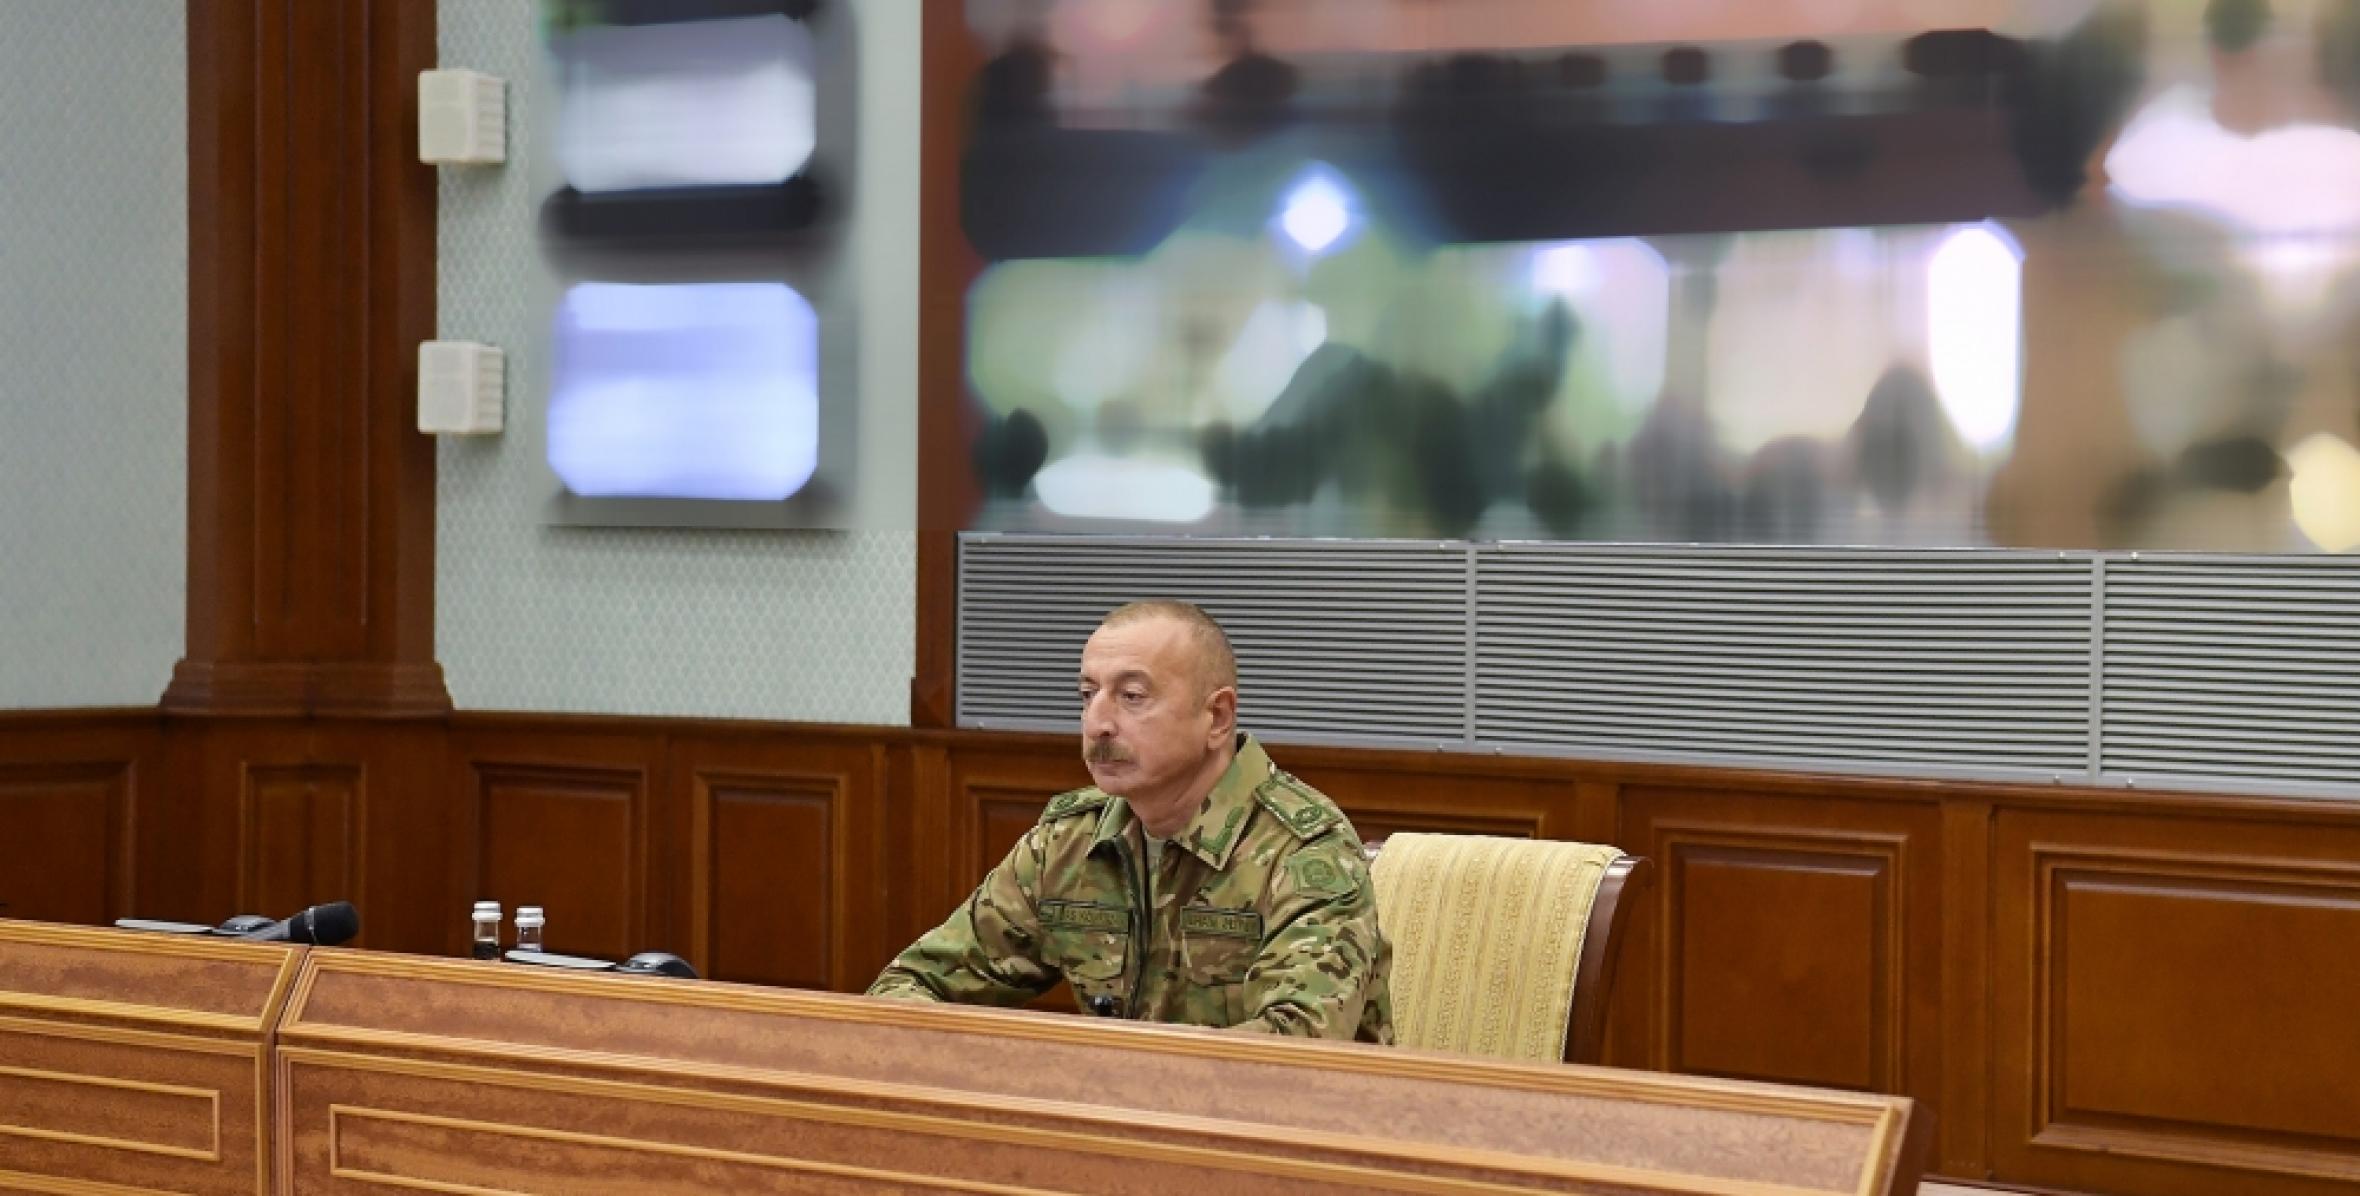 Operational meeting was held under the President, Commander-in-Chief Ilham Aliyev at Central Command Post of the Ministry of Defense